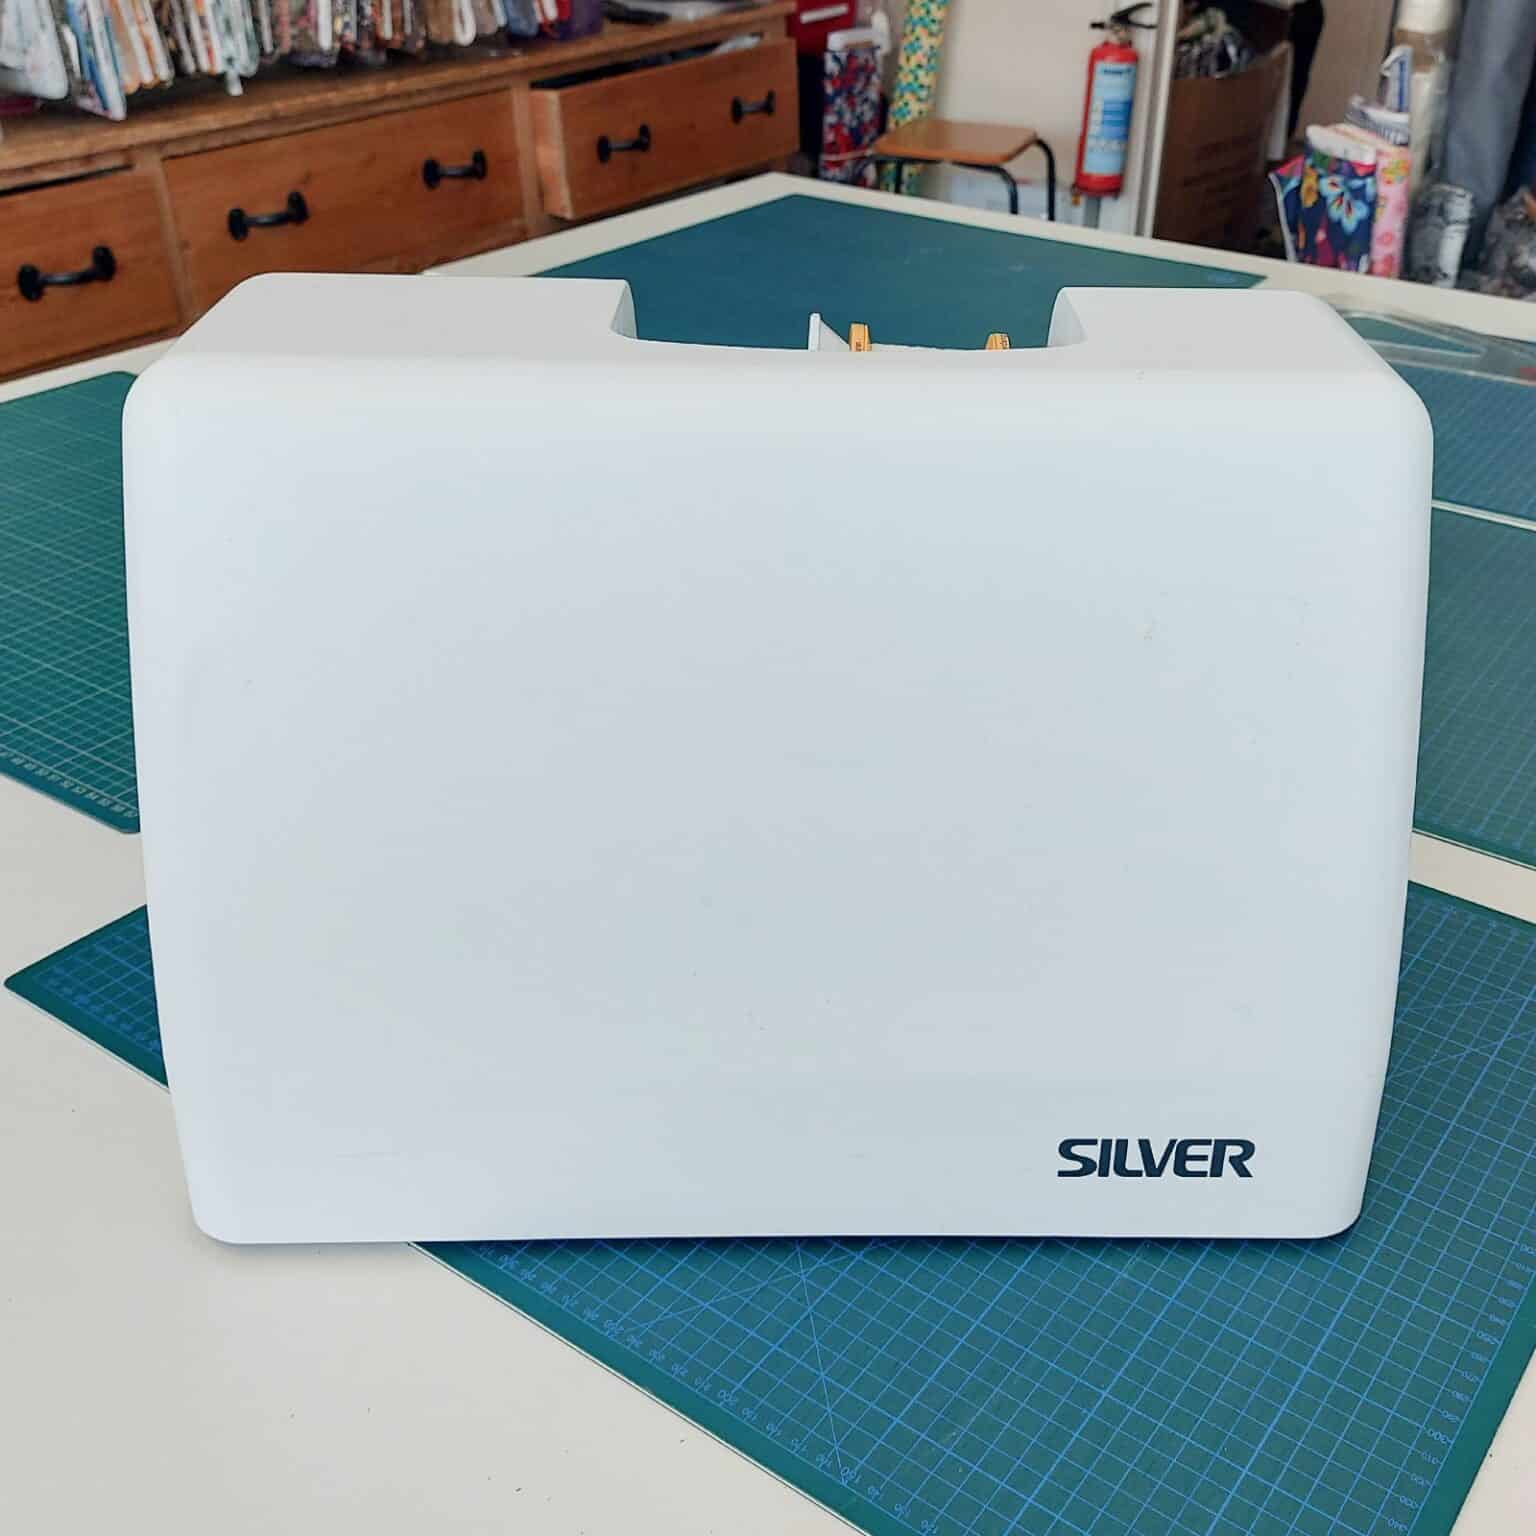 Hard Case For The Silver 1040 Sewing Machine | More Sewing